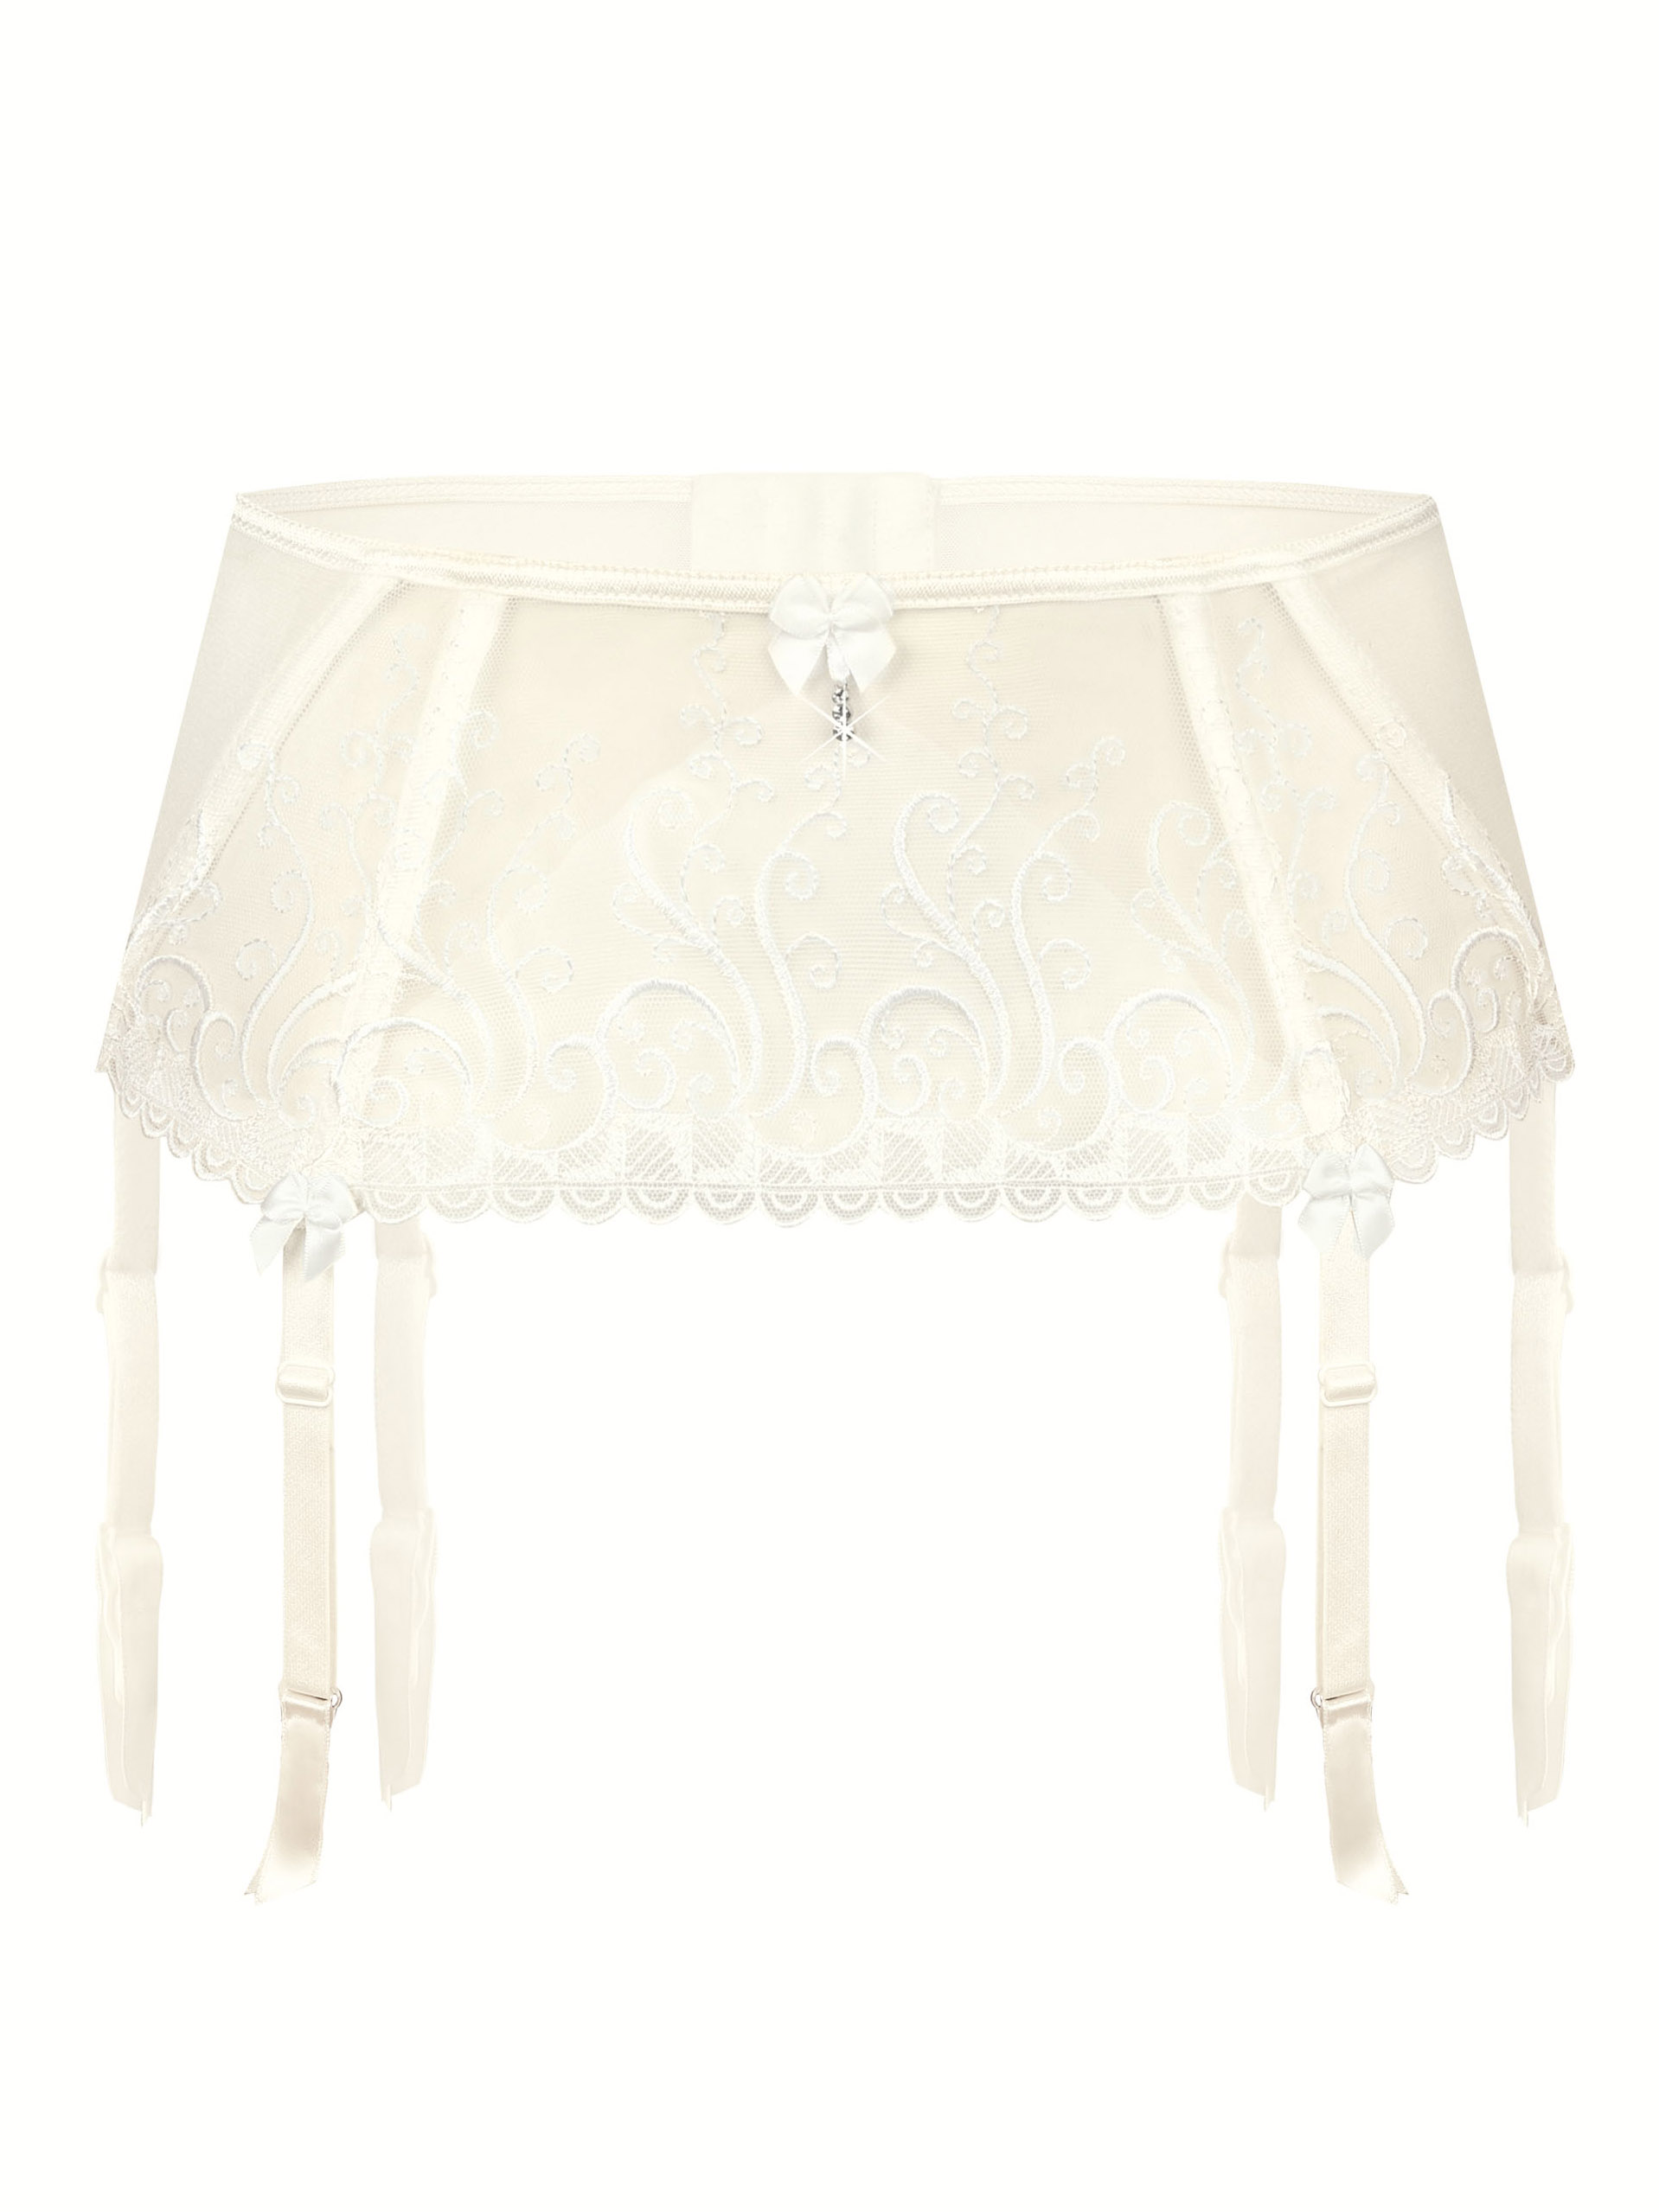 Lace garter belt with sheer tulle Roza Anuk #2